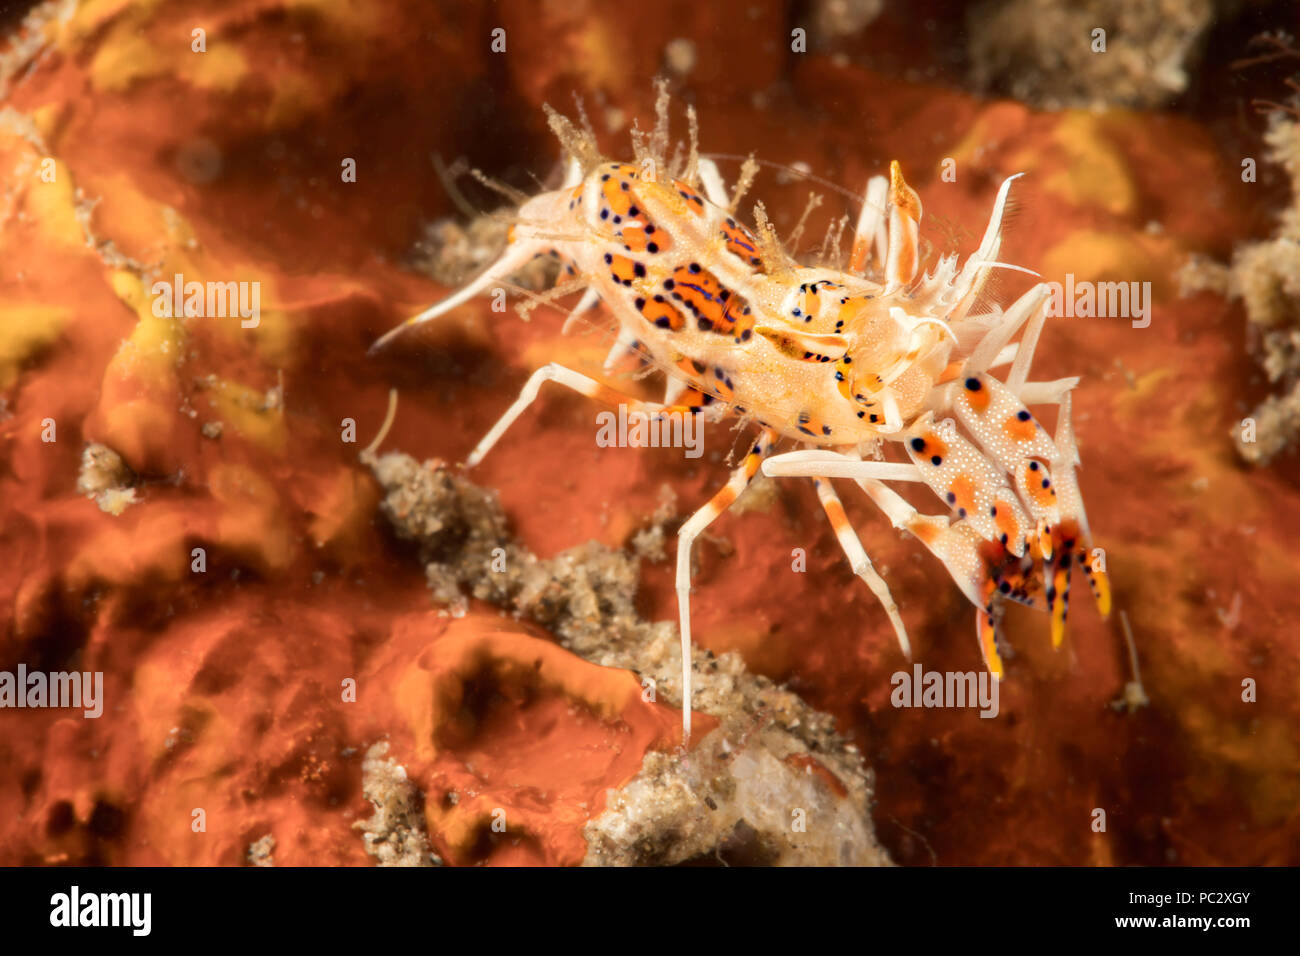 Spiny tiger shrimp, Phyllognathia ceratophthalma, also known as dragon shrimp, feed on sea stars and grow to about 2cm in length, Philippines. Stock Photo